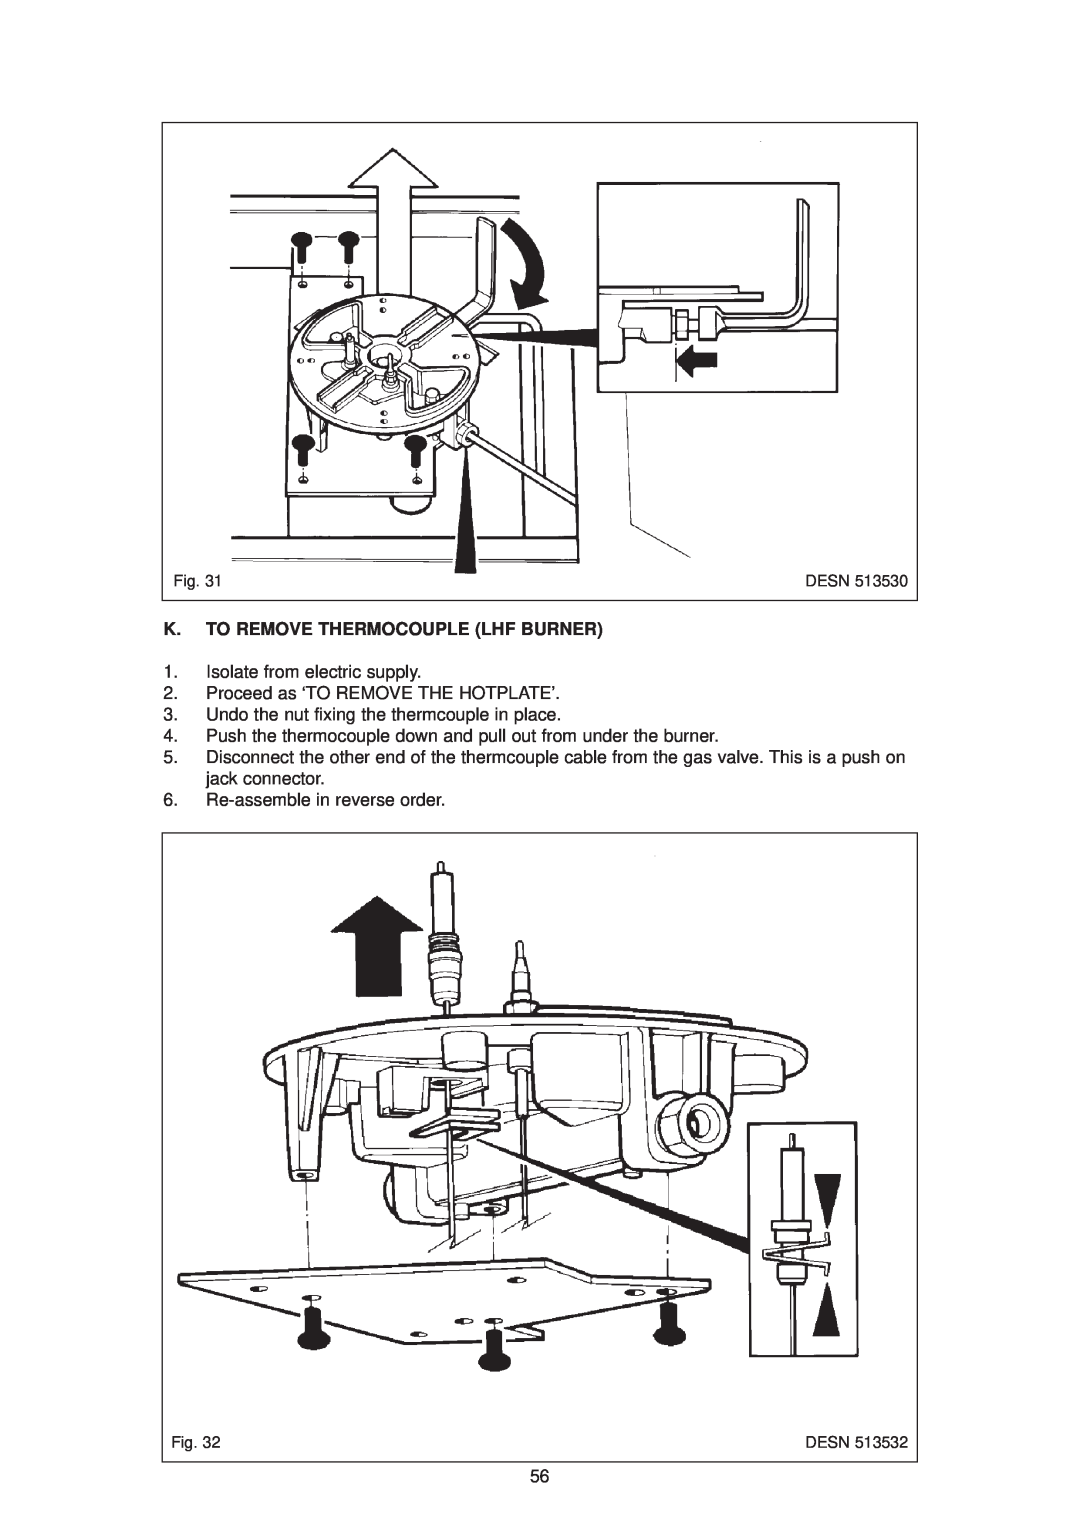 Aga Ranges DC6 (FFD) K. To Remove Thermocouple Lhf Burner, Isolate from electric supply, Re-assemble in reverse order 